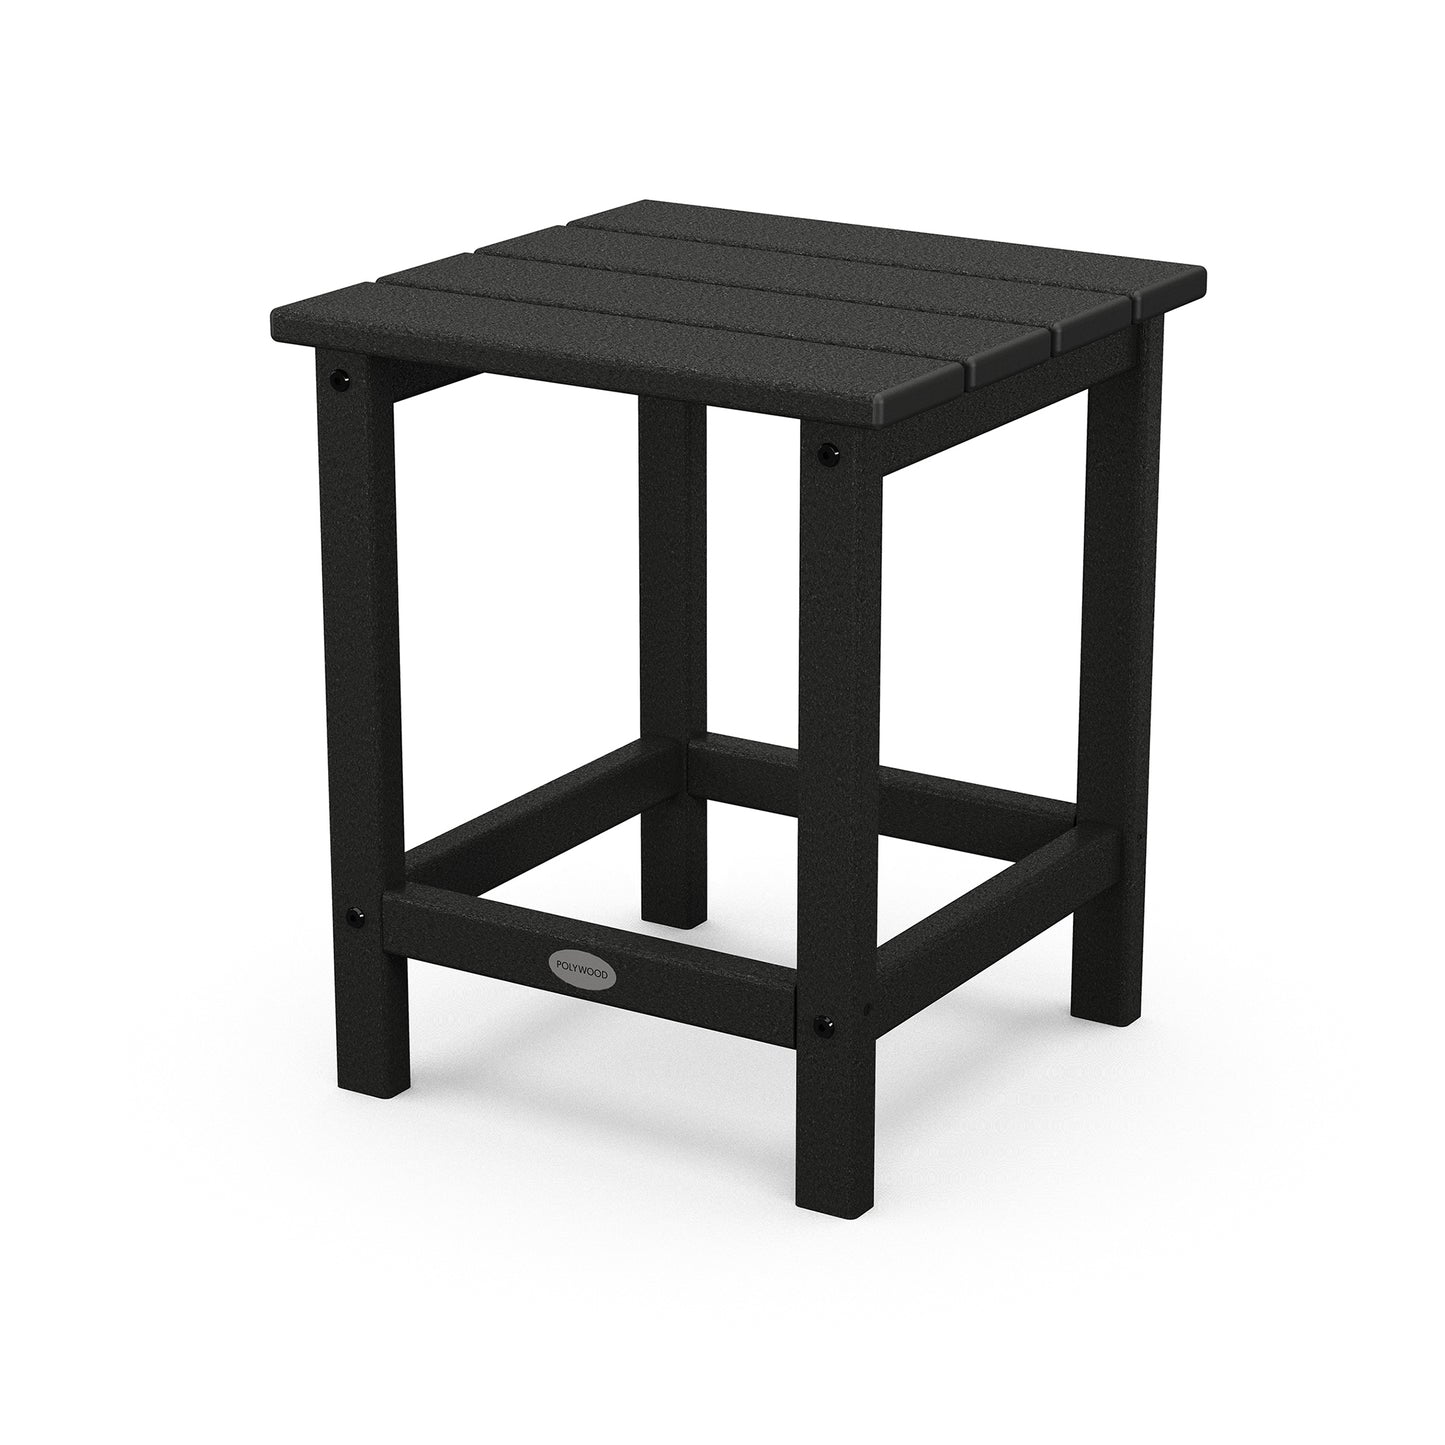 A black POLYWOOD® Long Island 18" side table with a slatted top and square legs, standing on a light grey, seamless background. The table features a lower shelf and simple, sturdy construction.